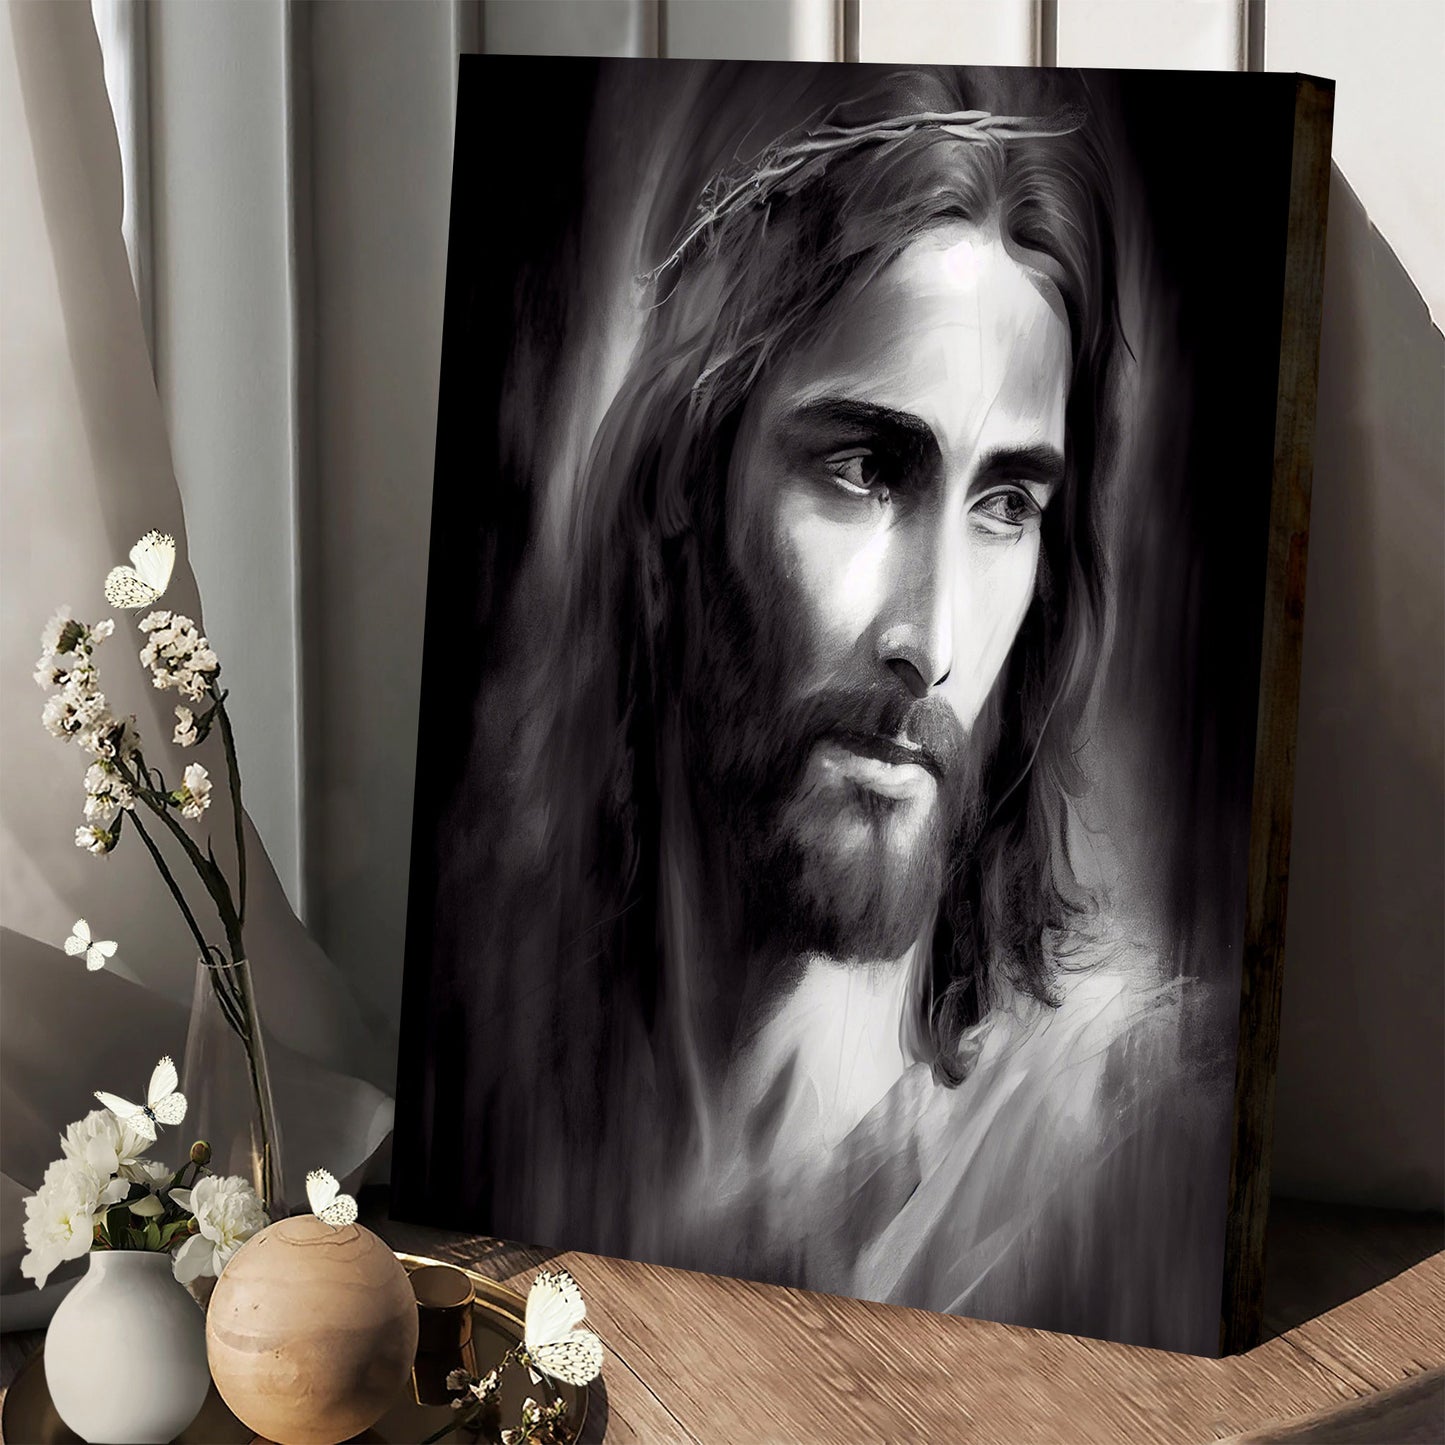 Jesus In Black And White - Canvas Pictures - Jesus Canvas Art - Christian Wall Art